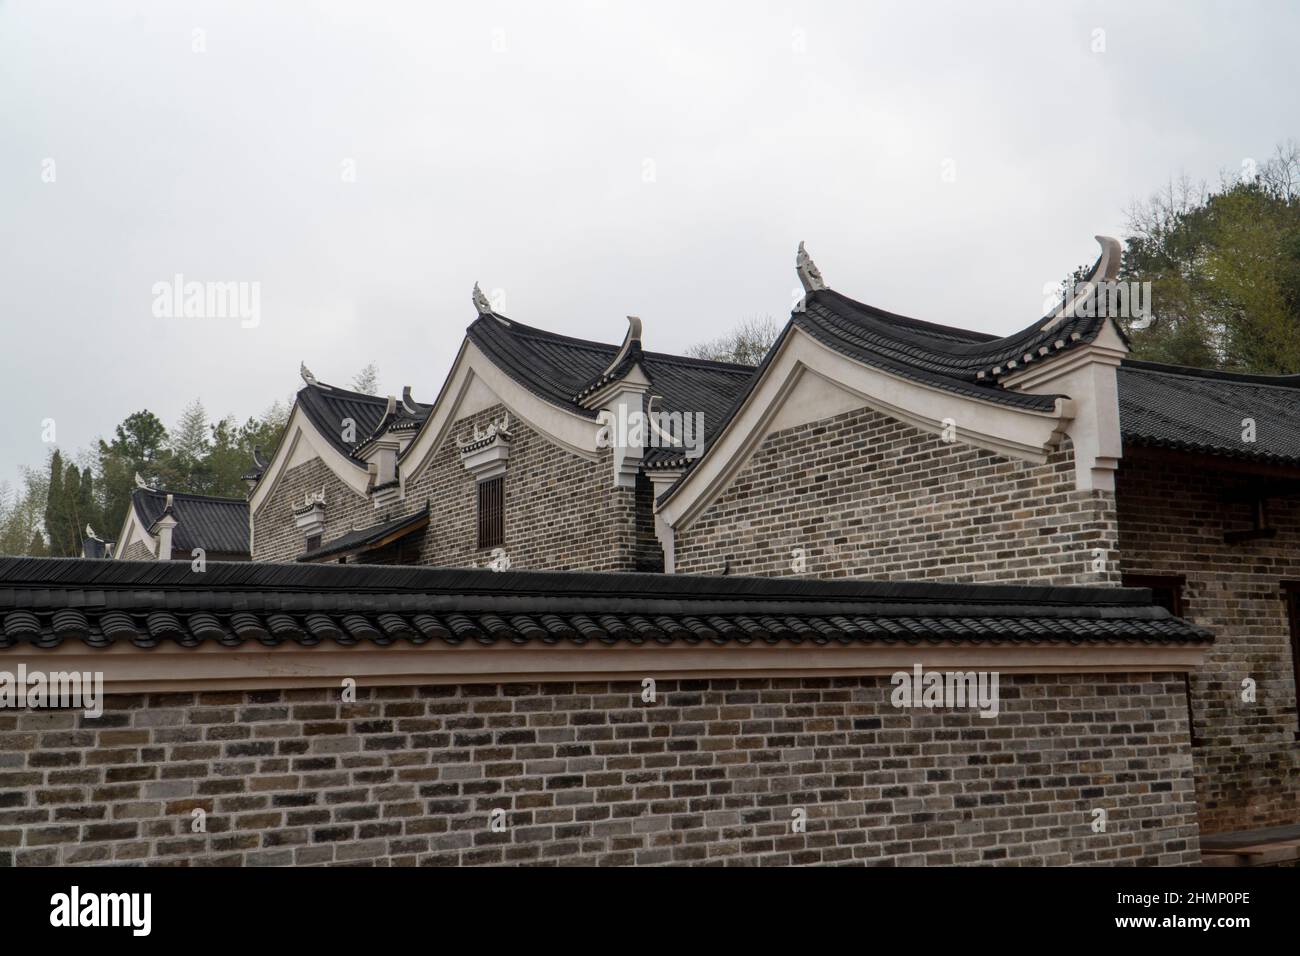 The former residence of Qiong Yao（琼瑶）, a contemporary Chinese writer, screenwriter and film and television producer in China. Stock Photo